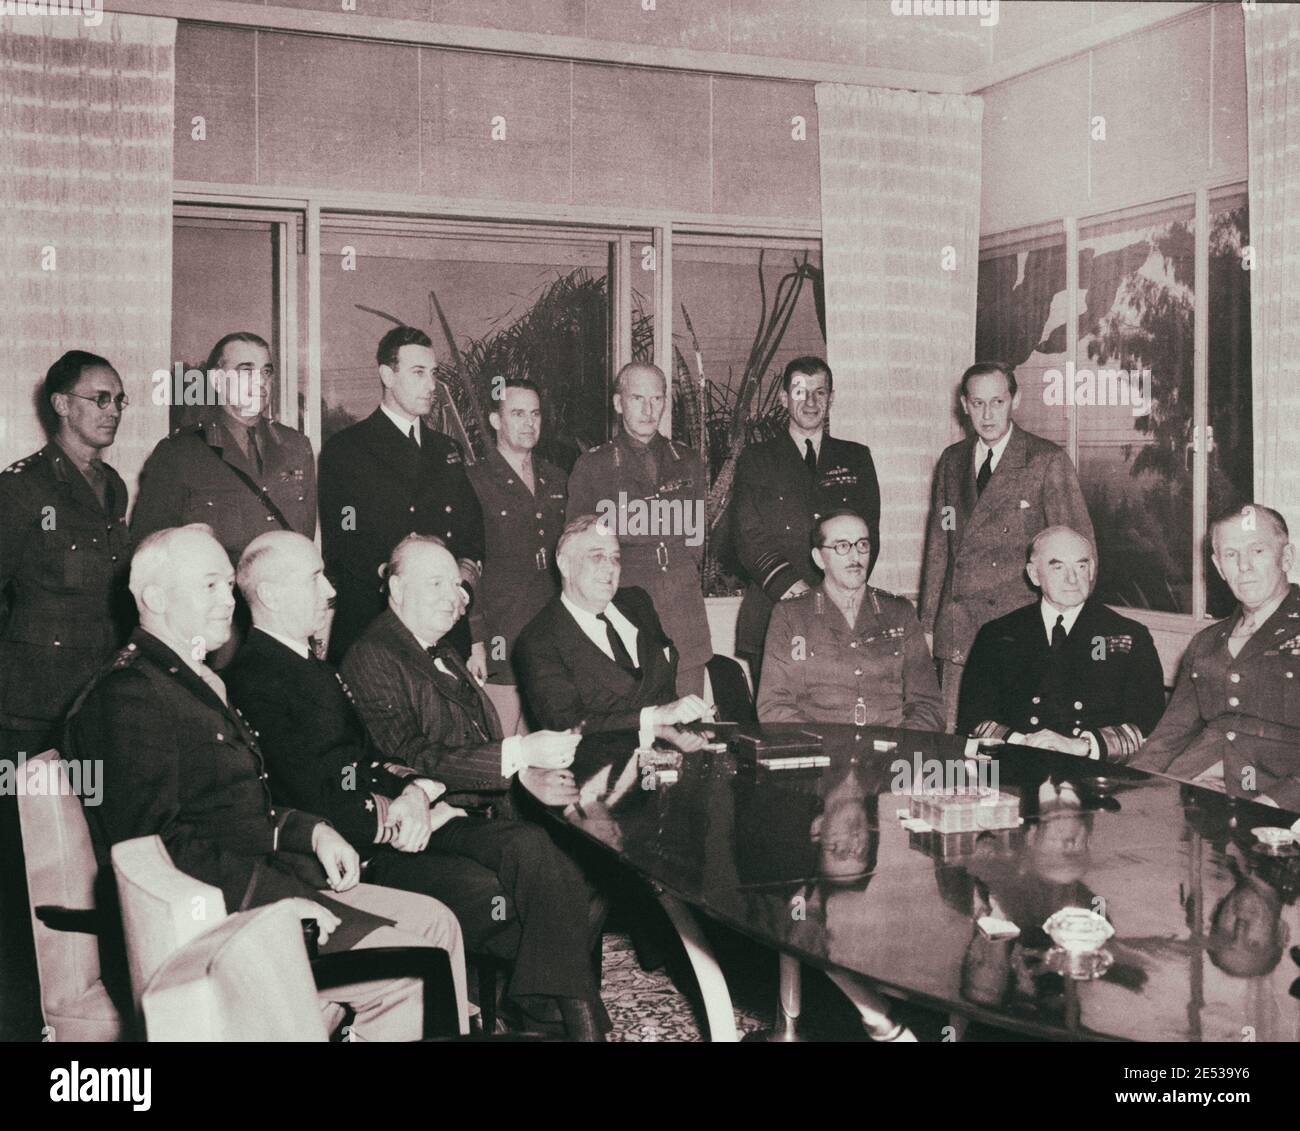 American and British military leaders at the Casablanca conference, Casablanca, Morocco. January 1943 Portrait includes Winston Churchill (seated thir Stock Photo